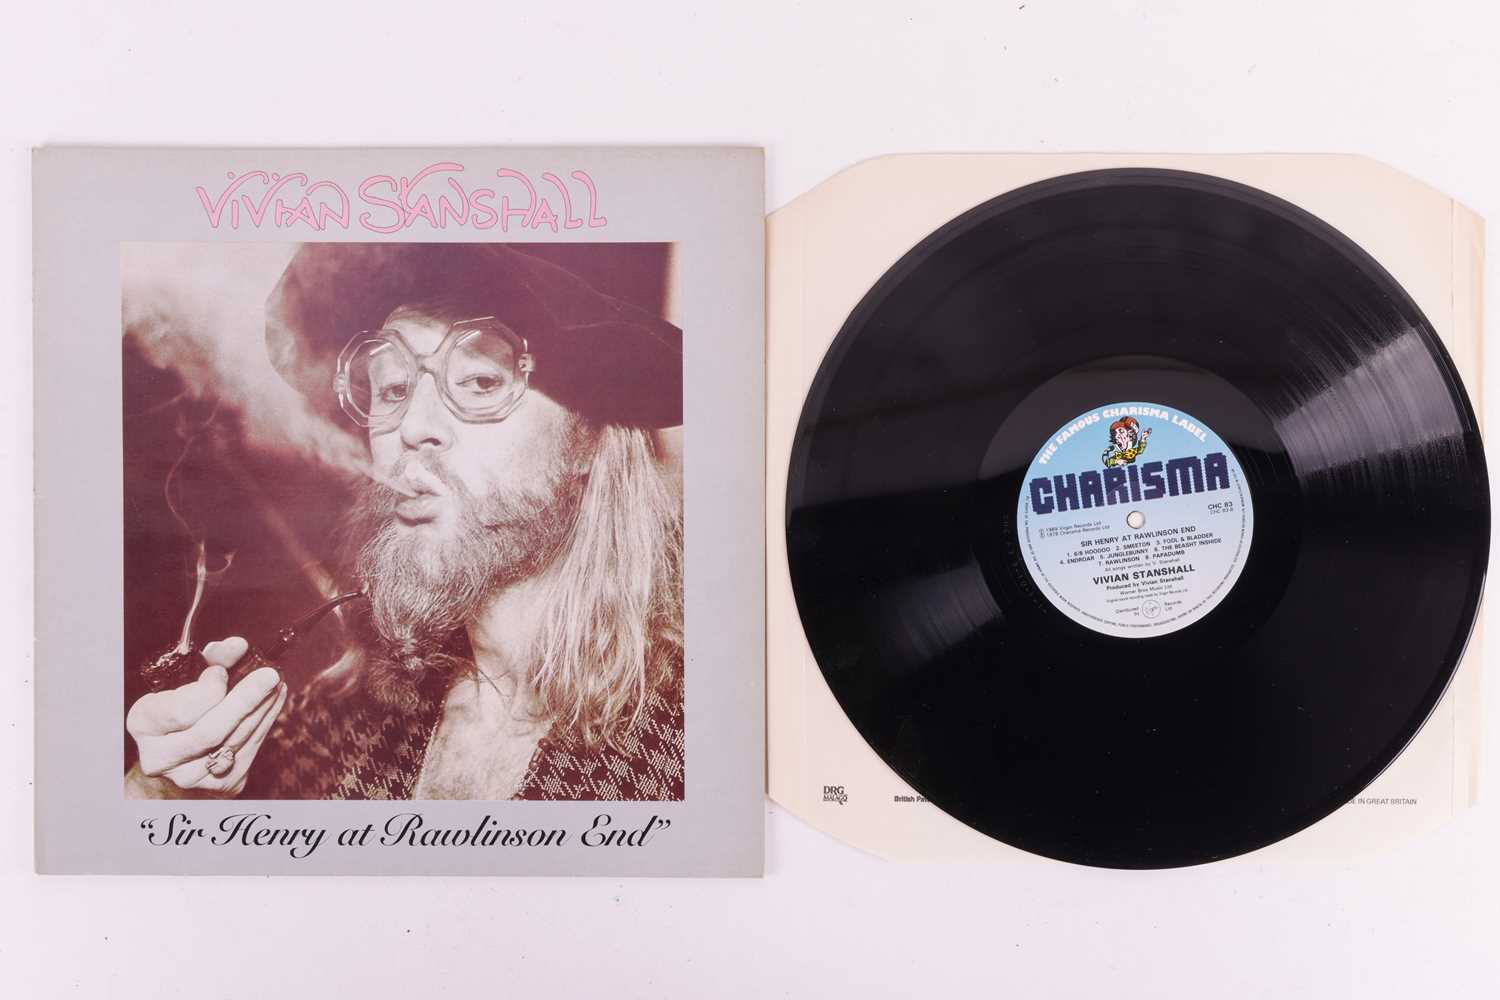 Sir Henry at Rawlinson End: from the personal collection of Vivian Stanshall, assorted items relatin - Image 9 of 11